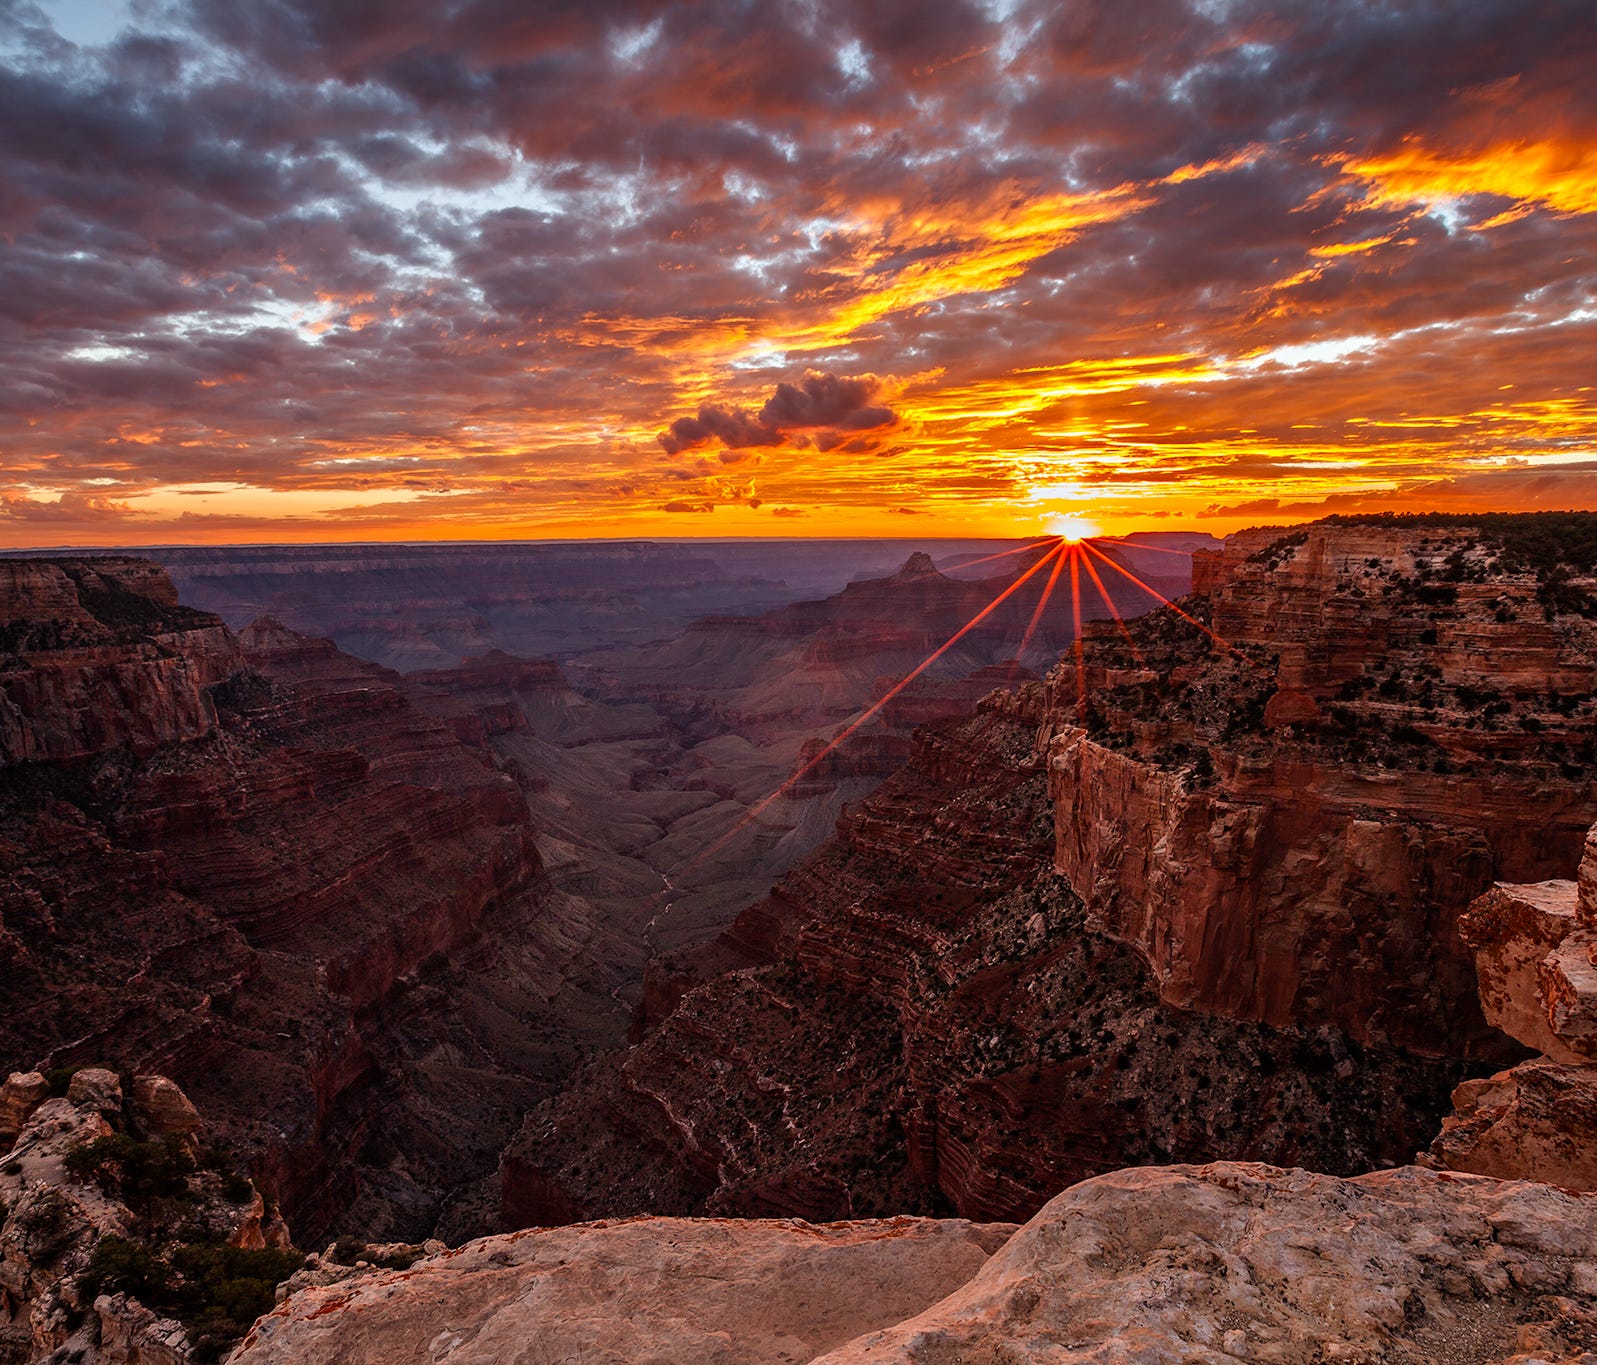 Sunsets are amazing at the Grand Canyon National Park in Arizona. Randy Langstraat captured this pic from Cape Royal -- a point that provides a panorama up, down, and across the canyon. With seemingly unlimited vistas to the east and west, it is popu